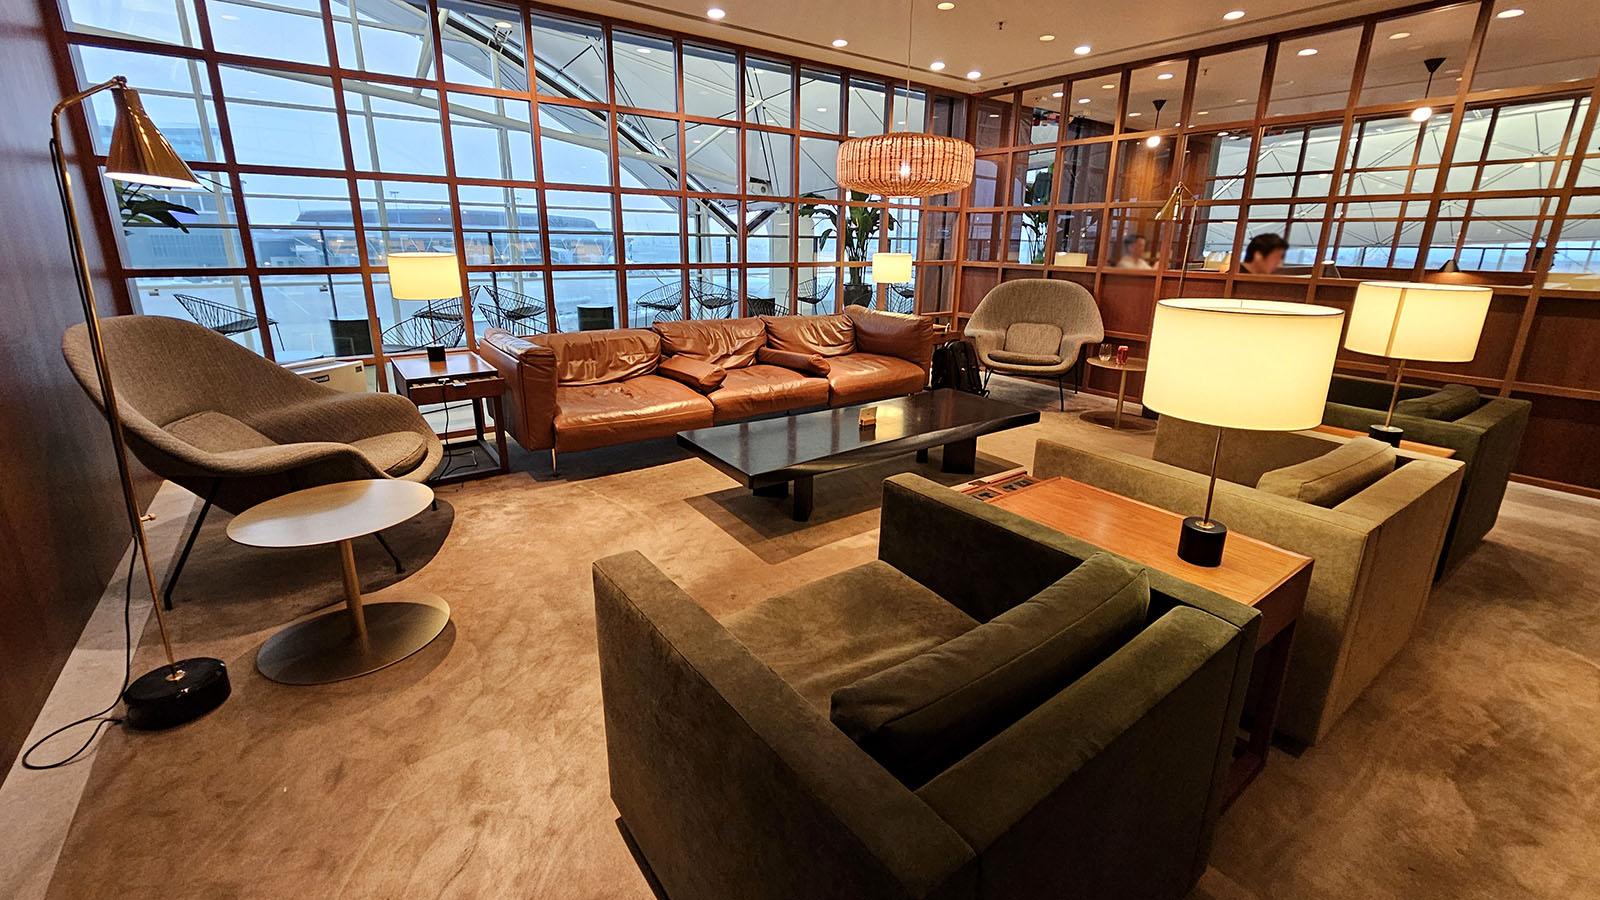 Apartment feel in Cathay Pacific's The Deck lounge